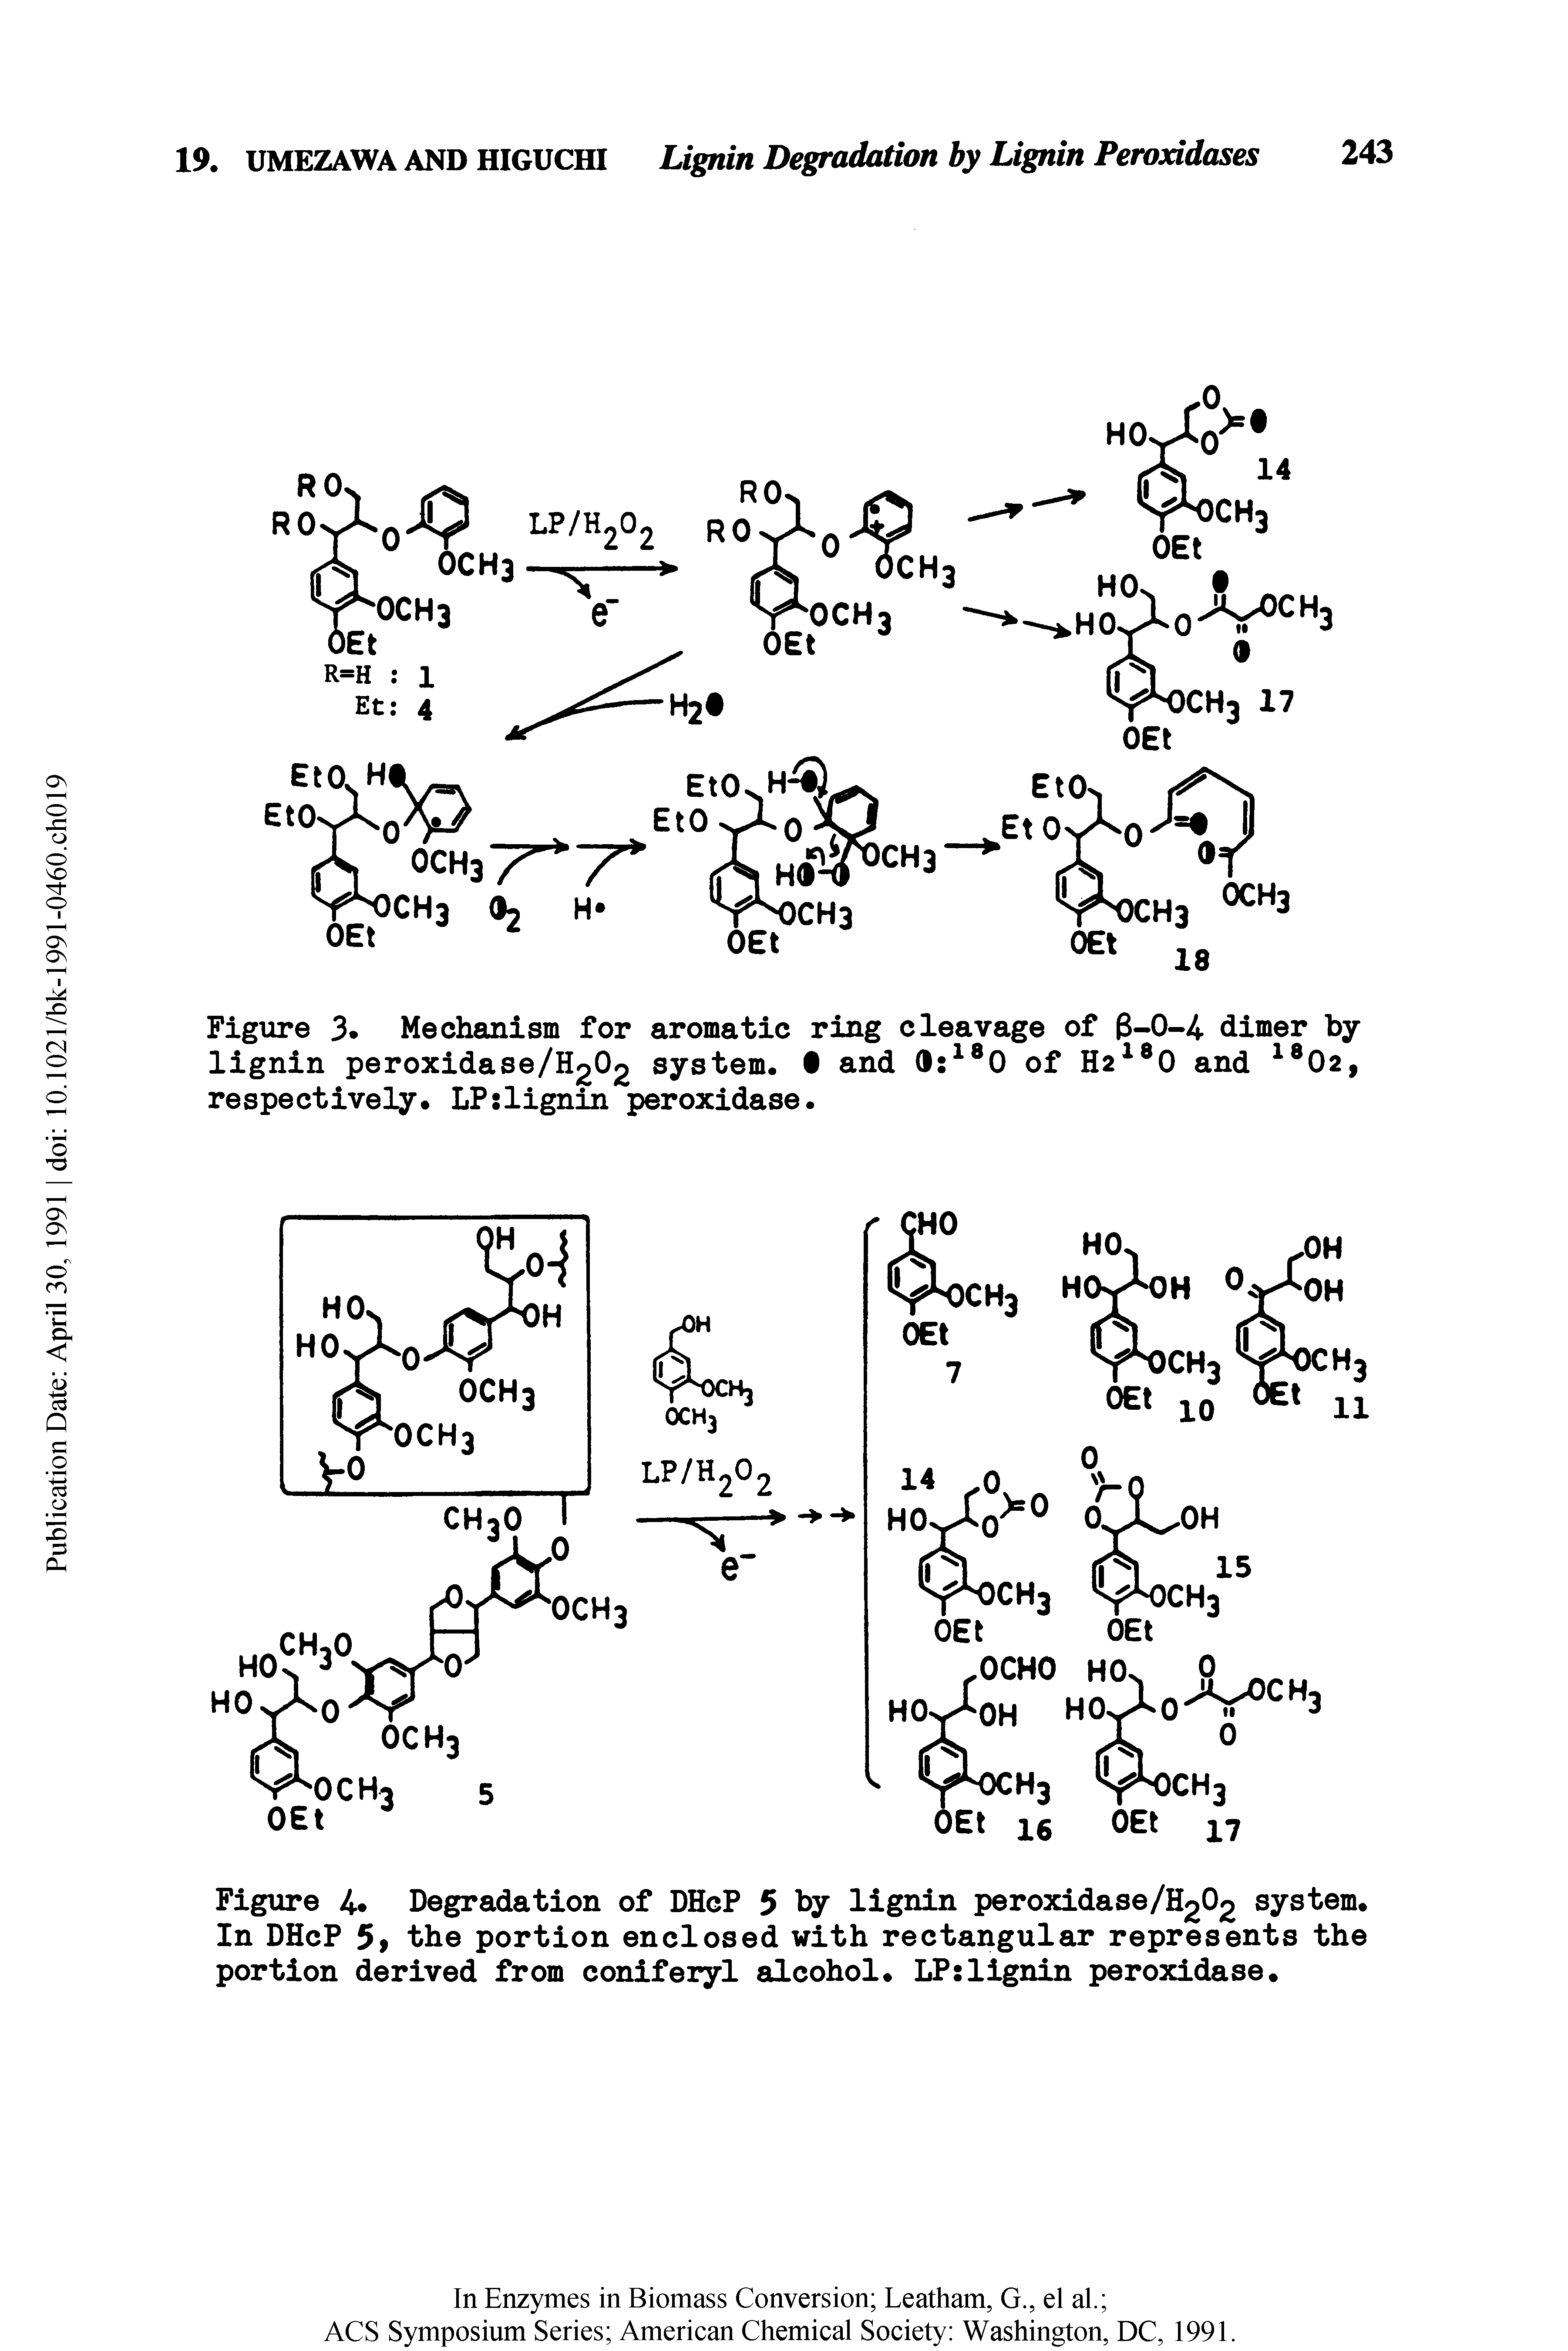 Figure 3. Mechanism for aromatic ring cleavage of 3-0-4 dimer by-lignin peroxidase/H202 system. and 0 0 of H2 0 and 02, respectively. LP lignin peroxidase.